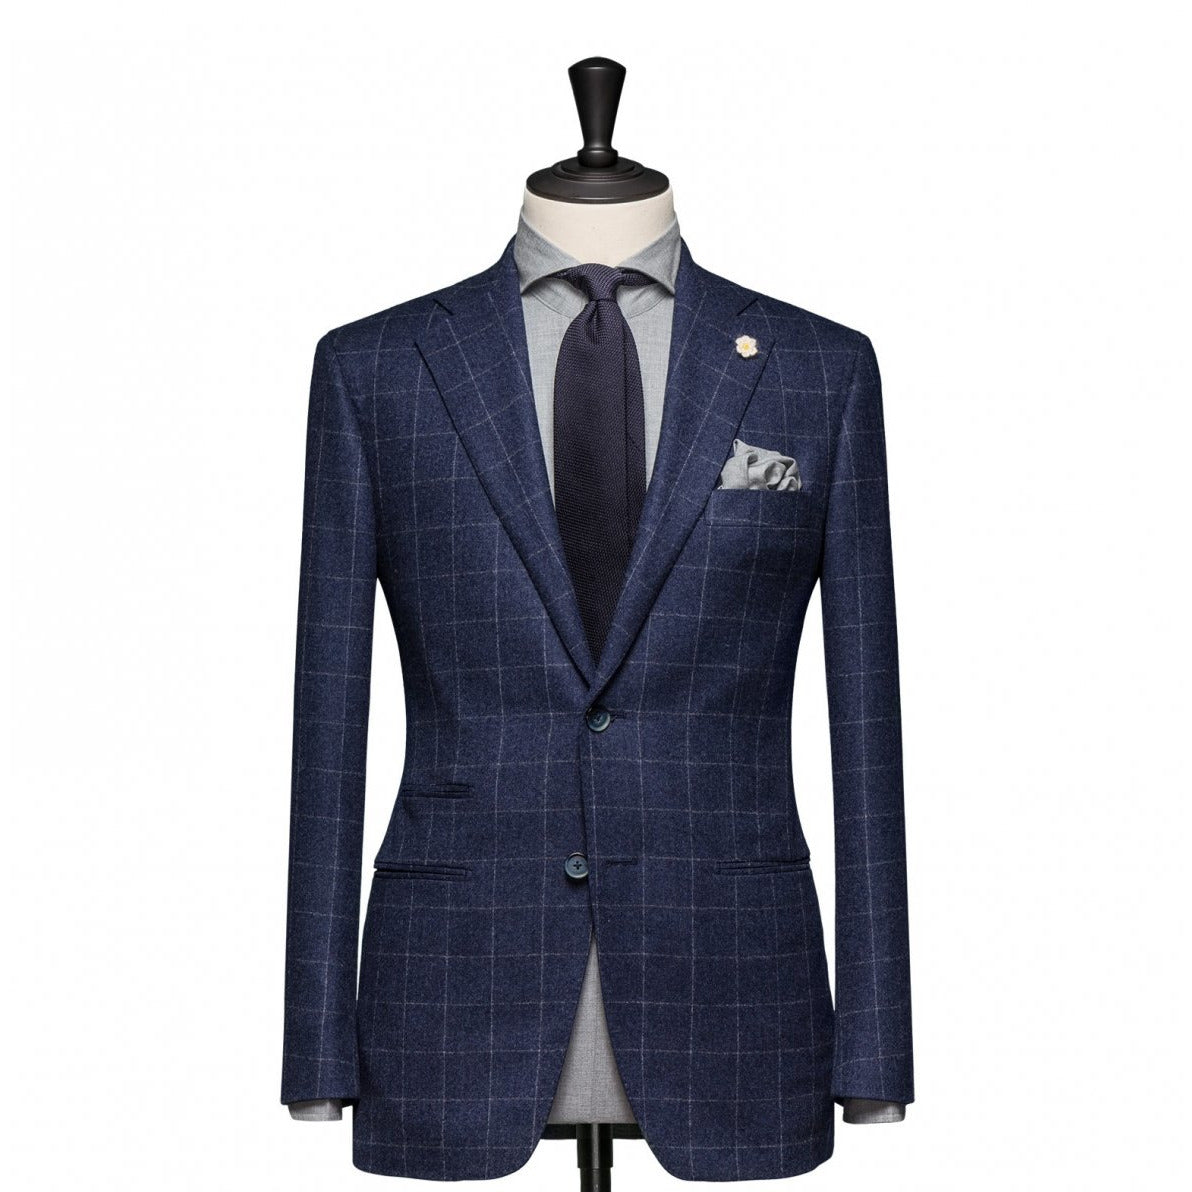 Made to Measure Suit Various Premium Cloth - Suit by Urbbana